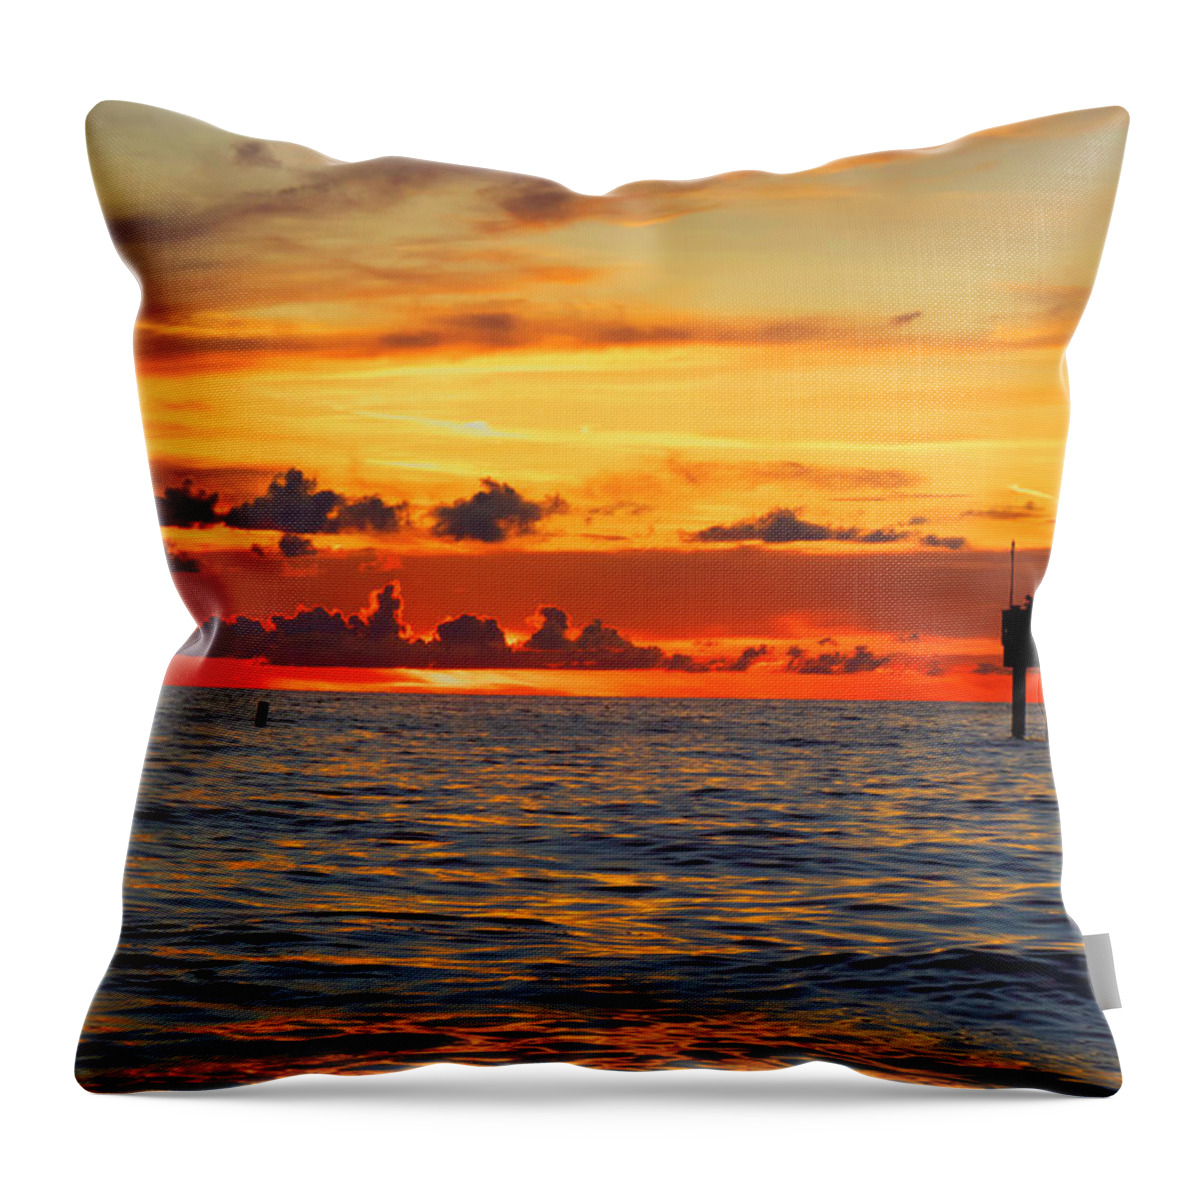 End Throw Pillow featuring the digital art The End of a Gulf Day by Linda Ritlinger